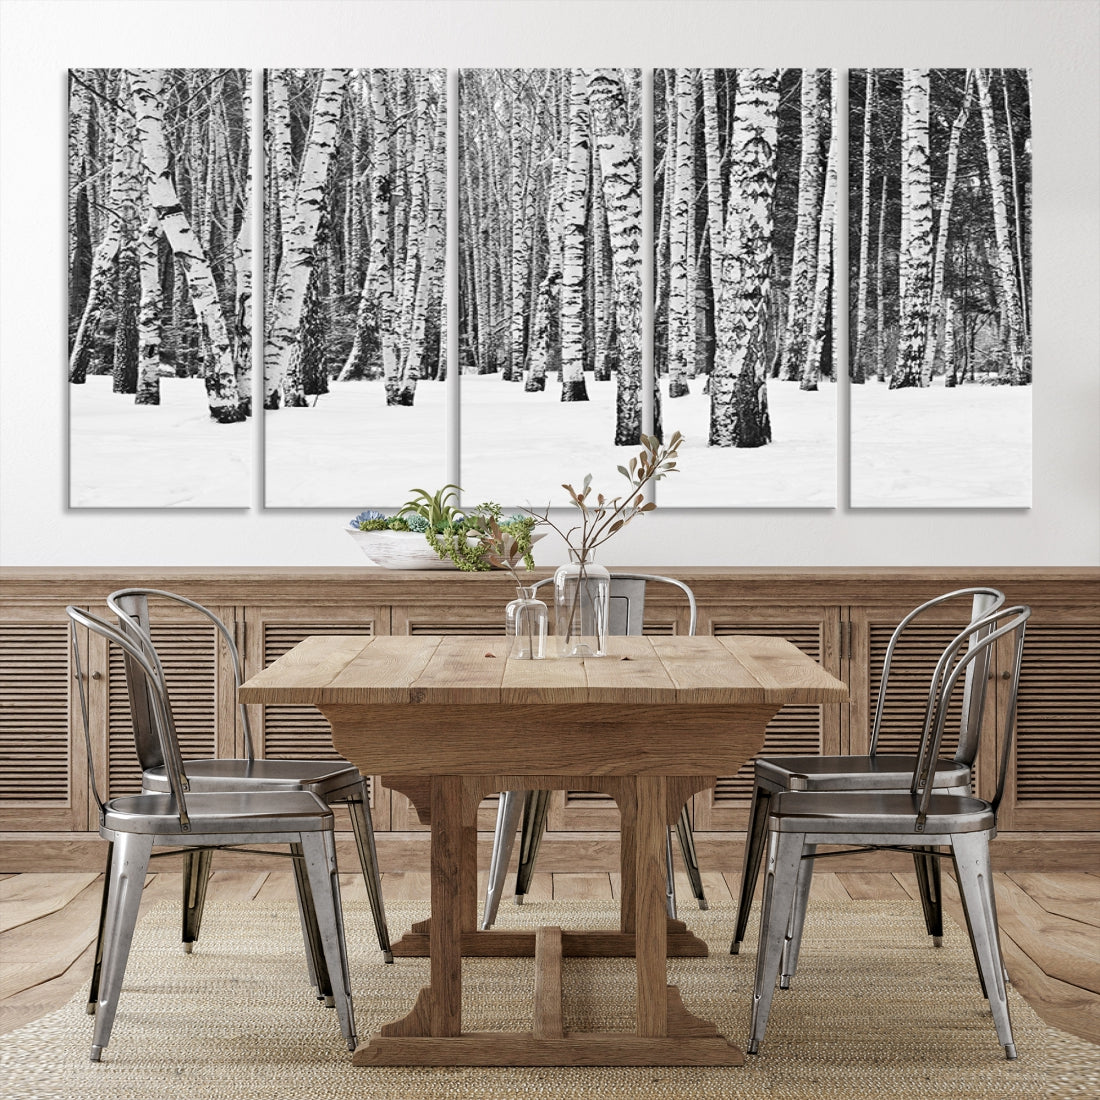 Large Wall Art Landscape Canvas Print - Forest in Winter with Snowy Ground and Trees